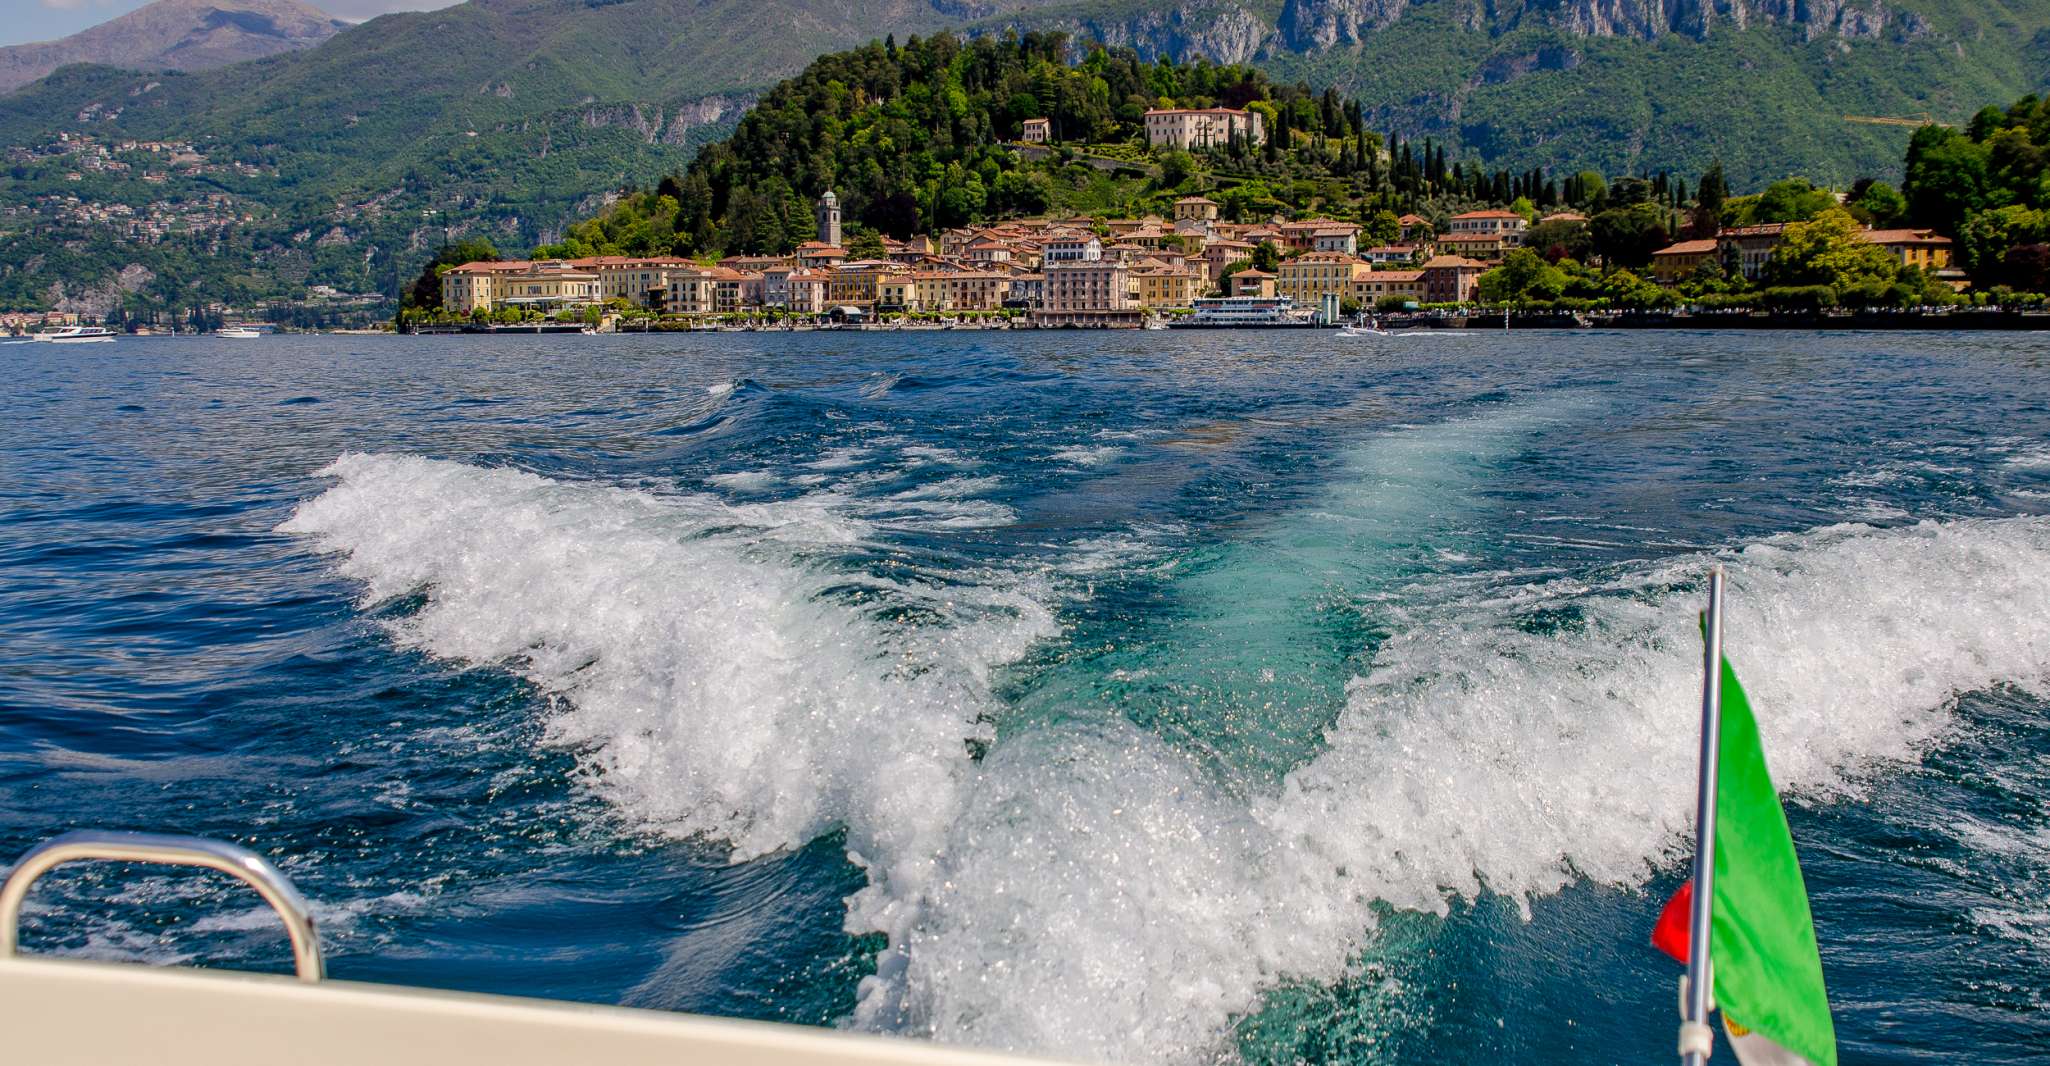 Exclusive Lake Como Boat Tour From Bellagio - Housity